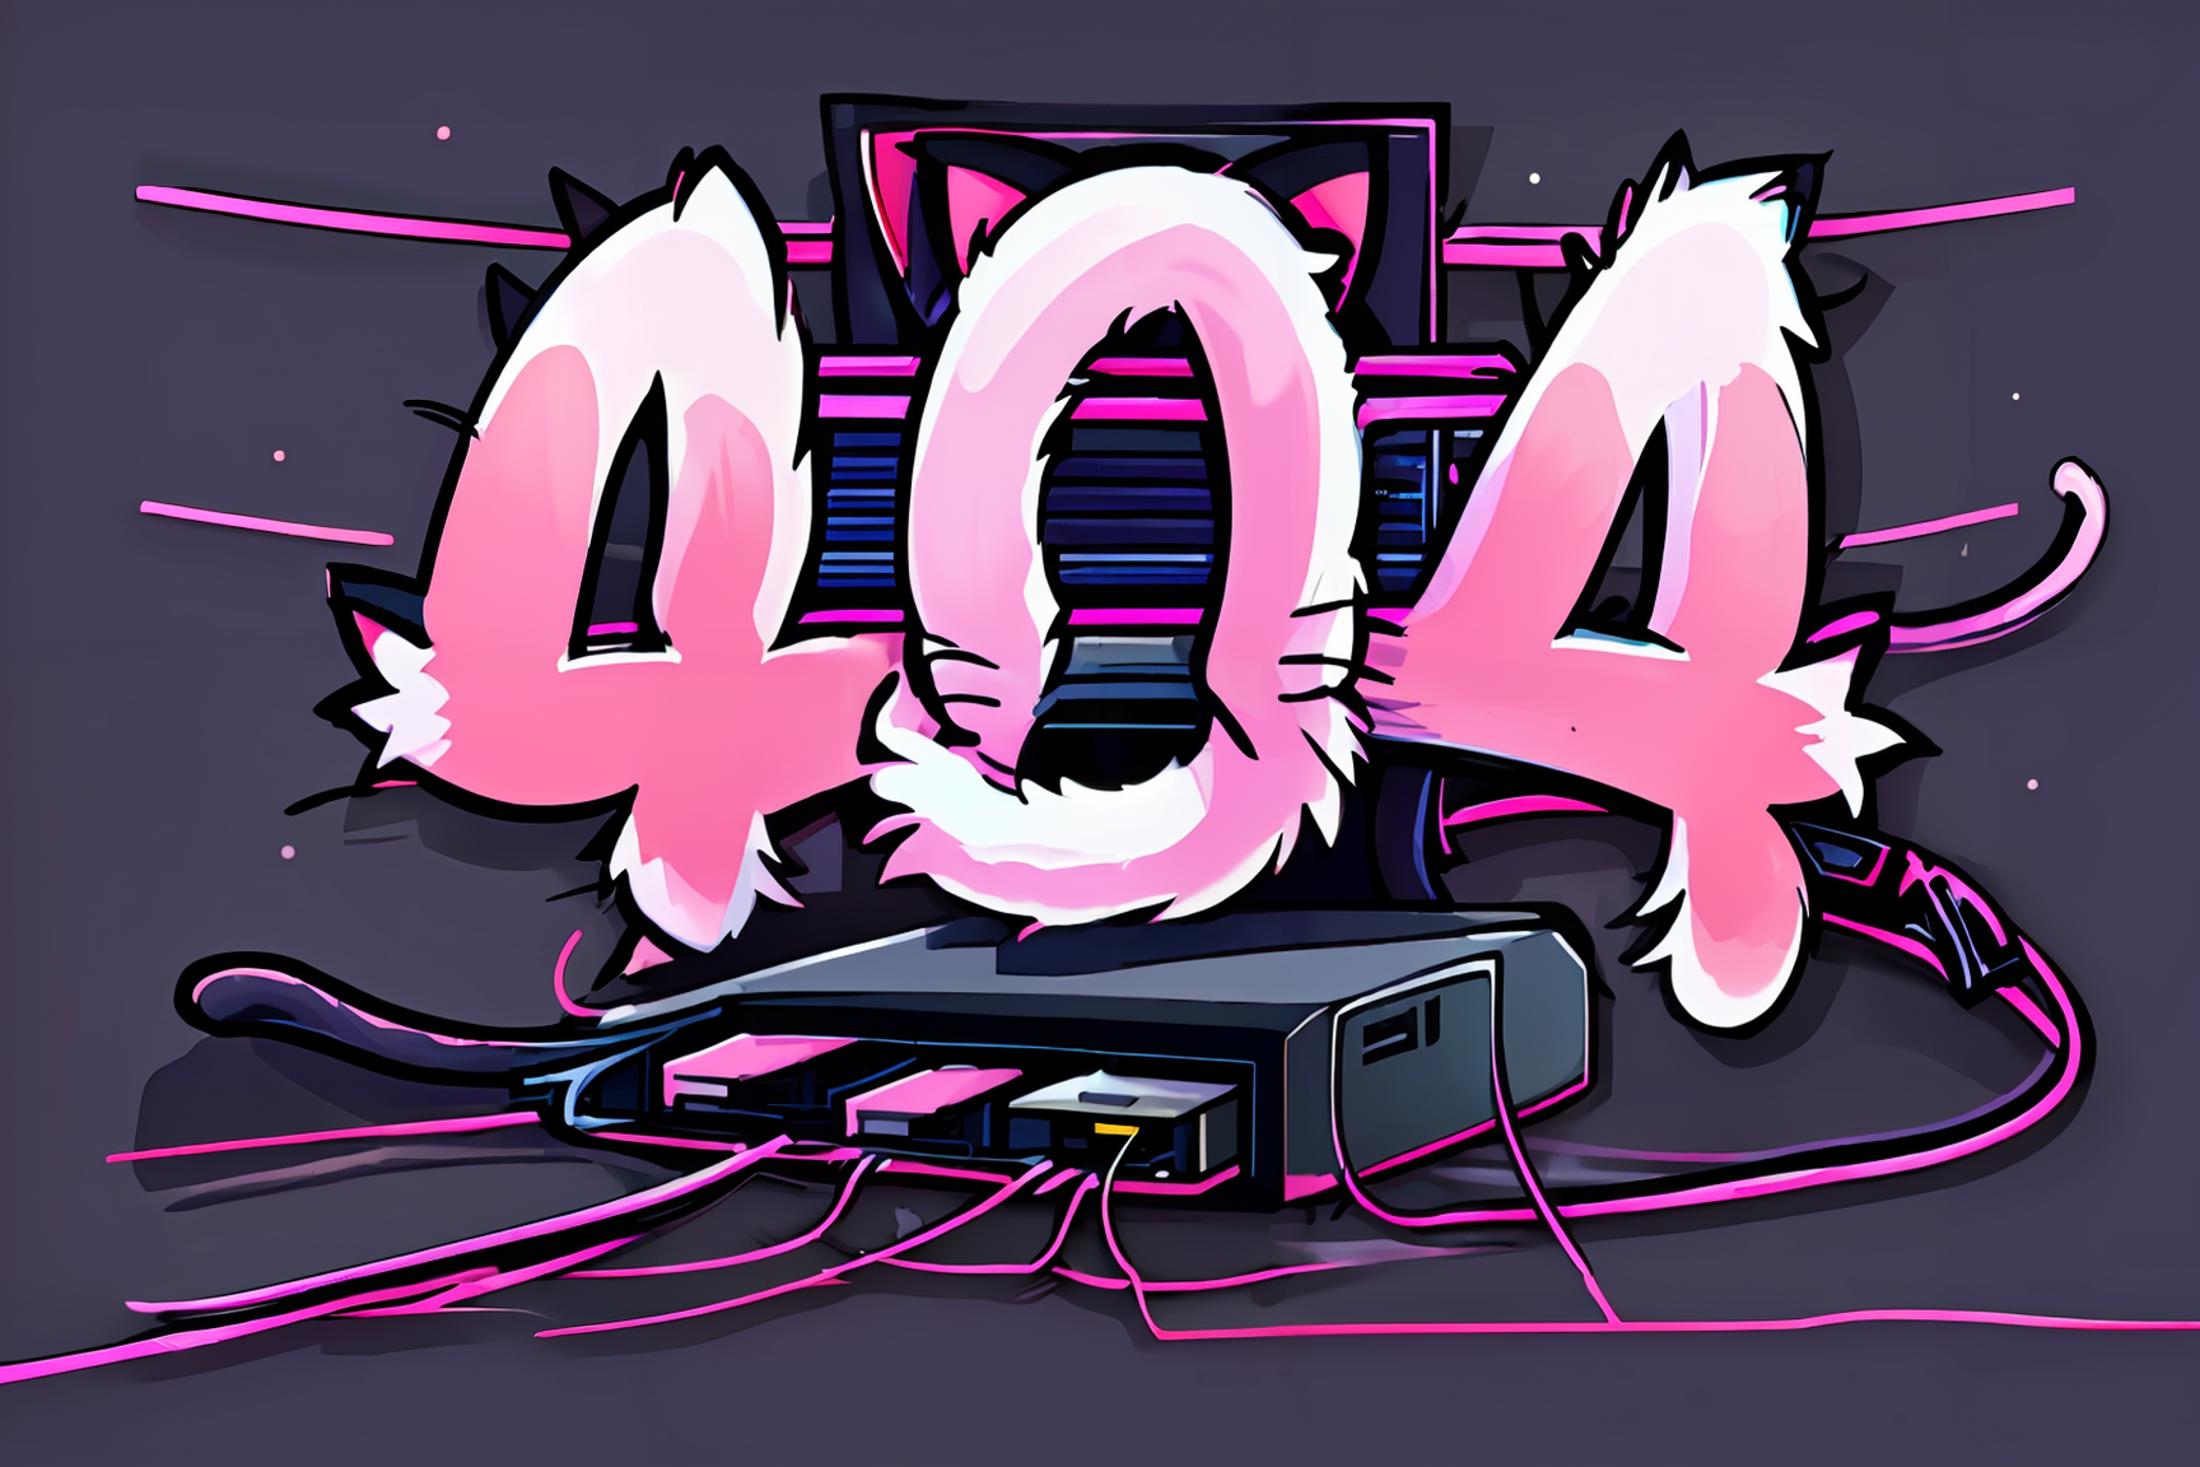 A 404 error image with a cat in a box.